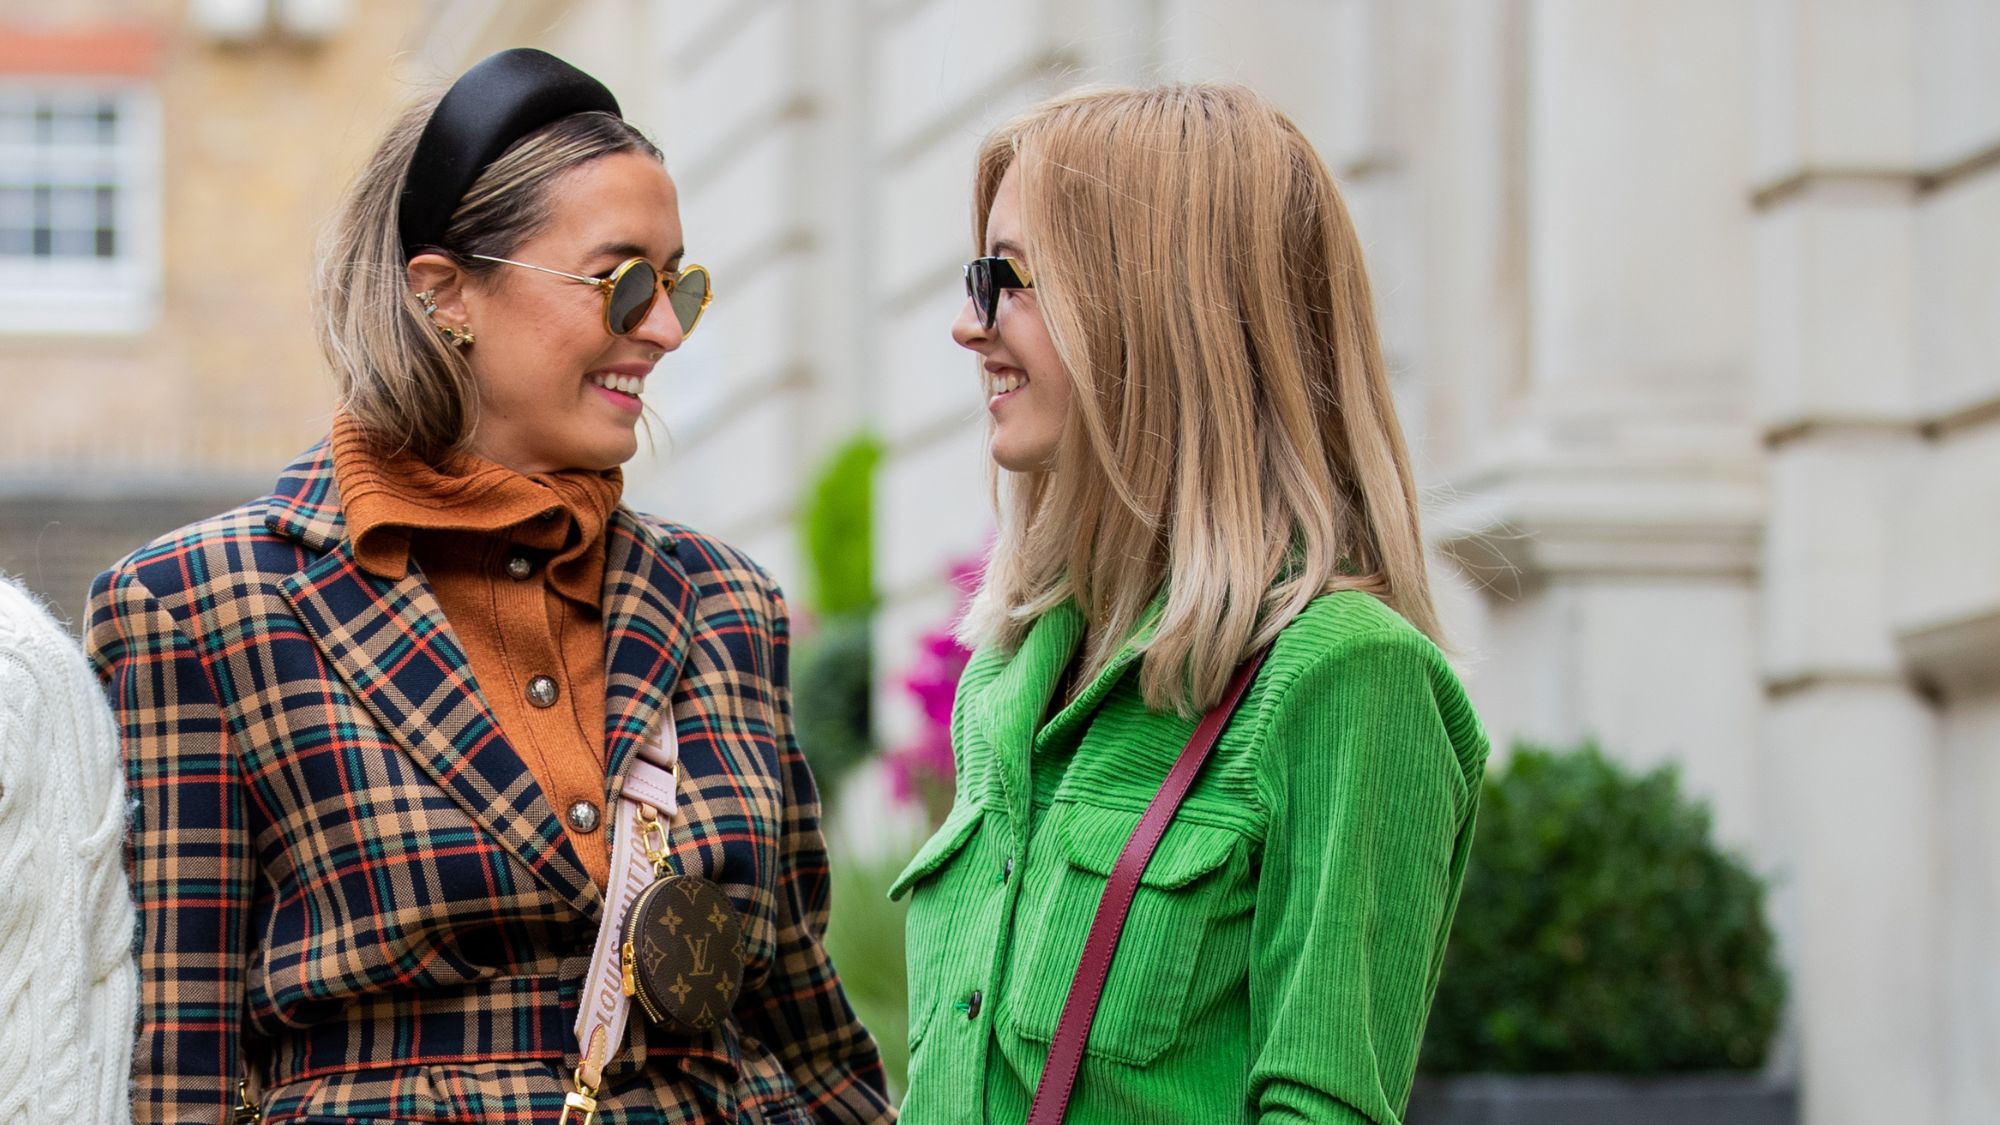 The 5 best headbands according to a headband-obsessed editor who